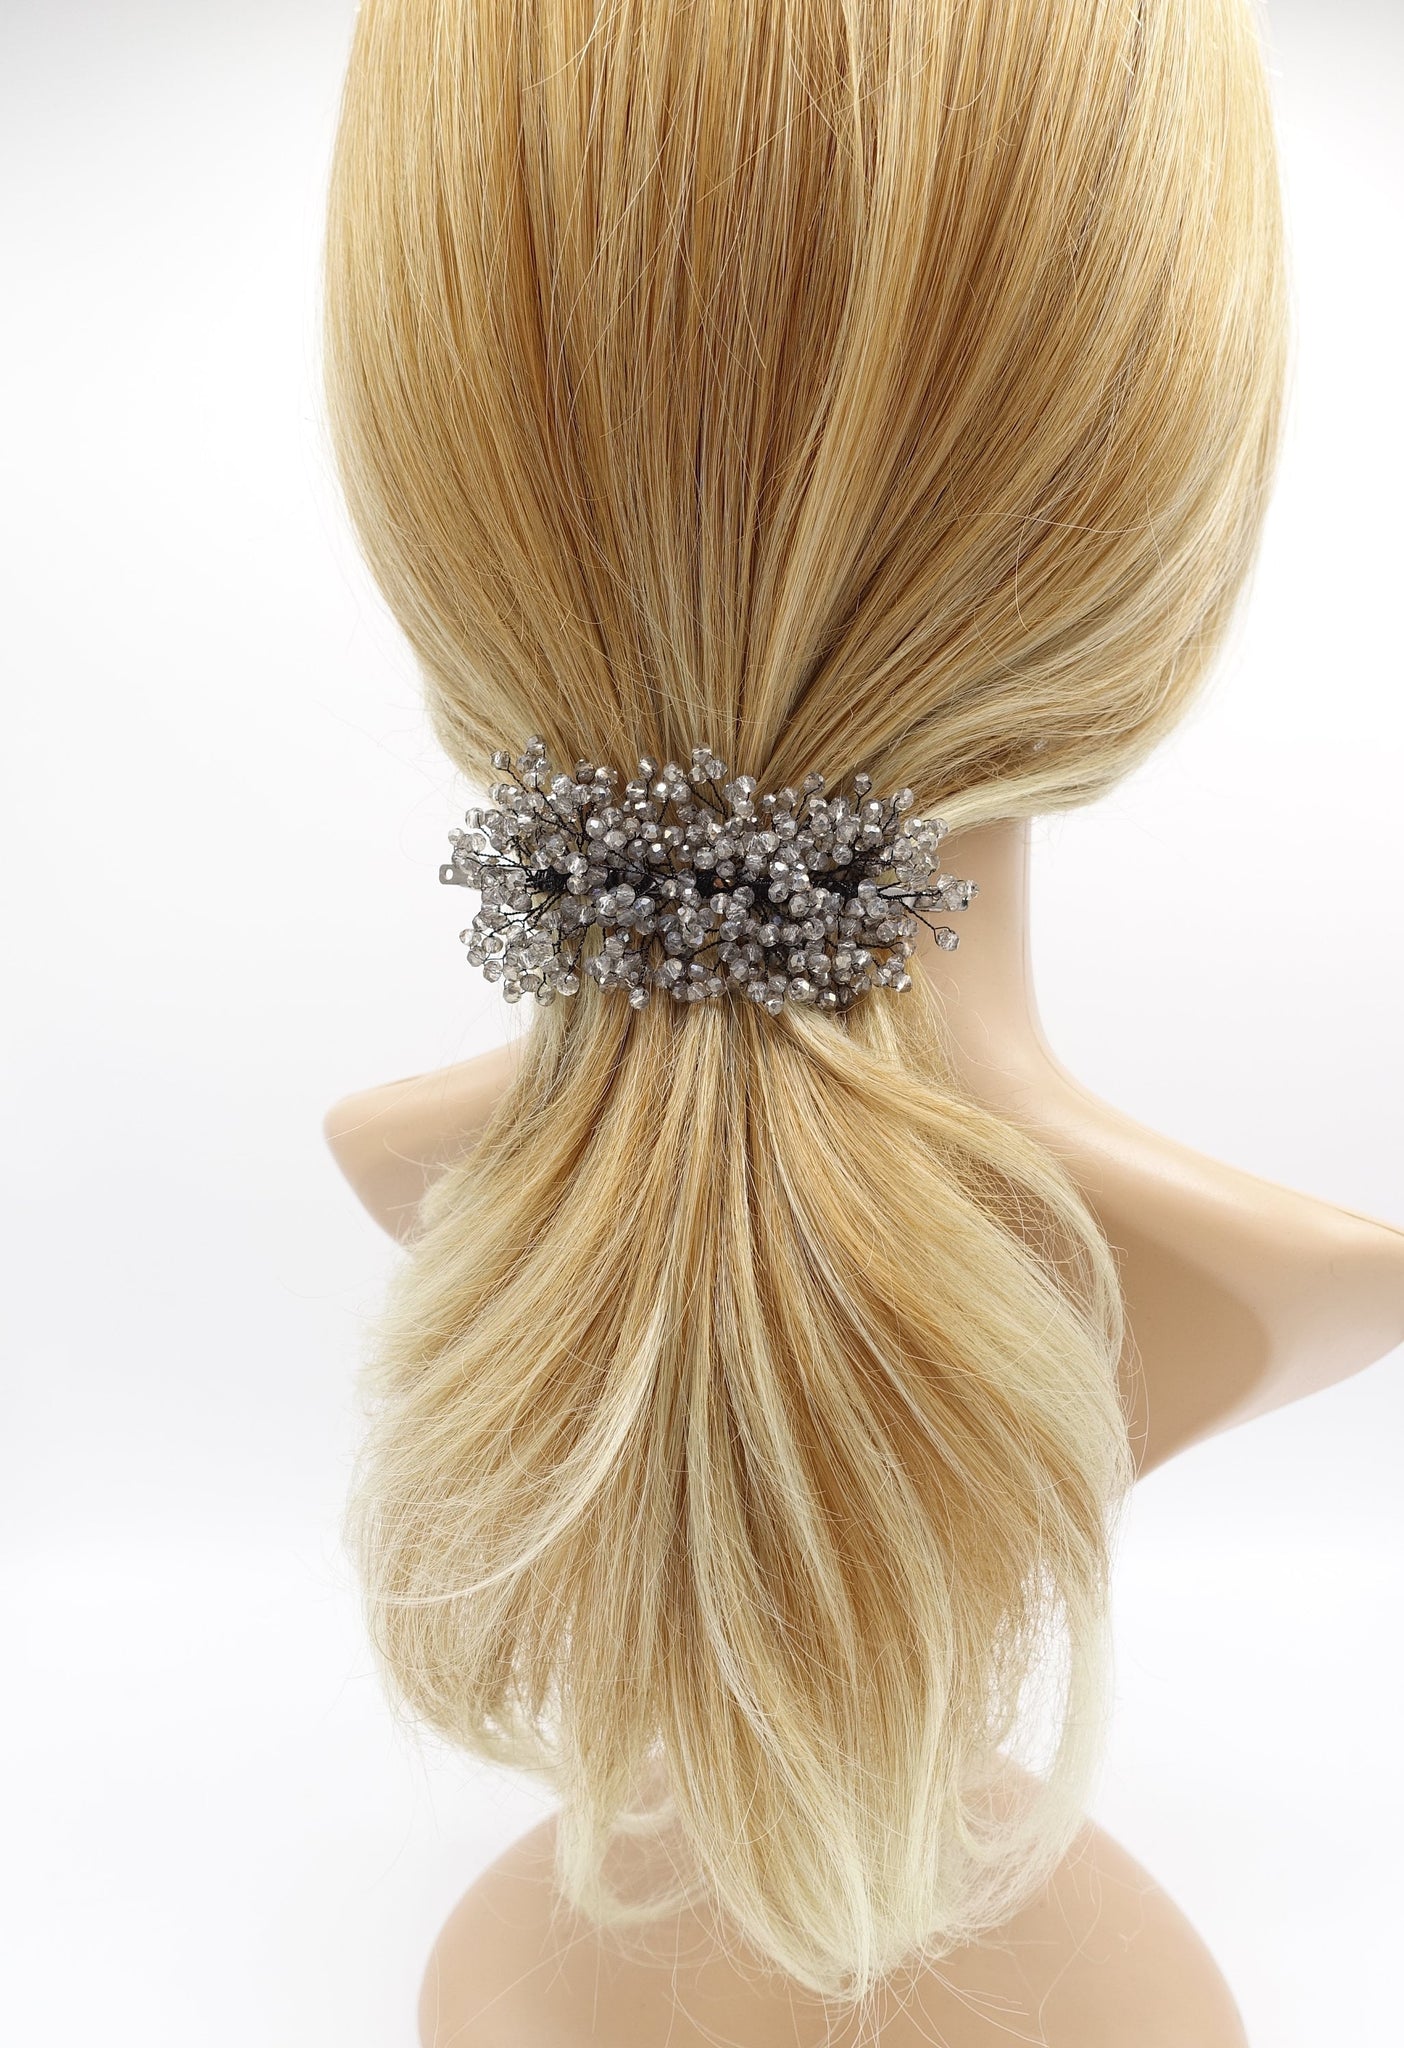 veryshine.com Barrette (Bow) Crystal beads wired flower hair barrette, special event hair barrette for women